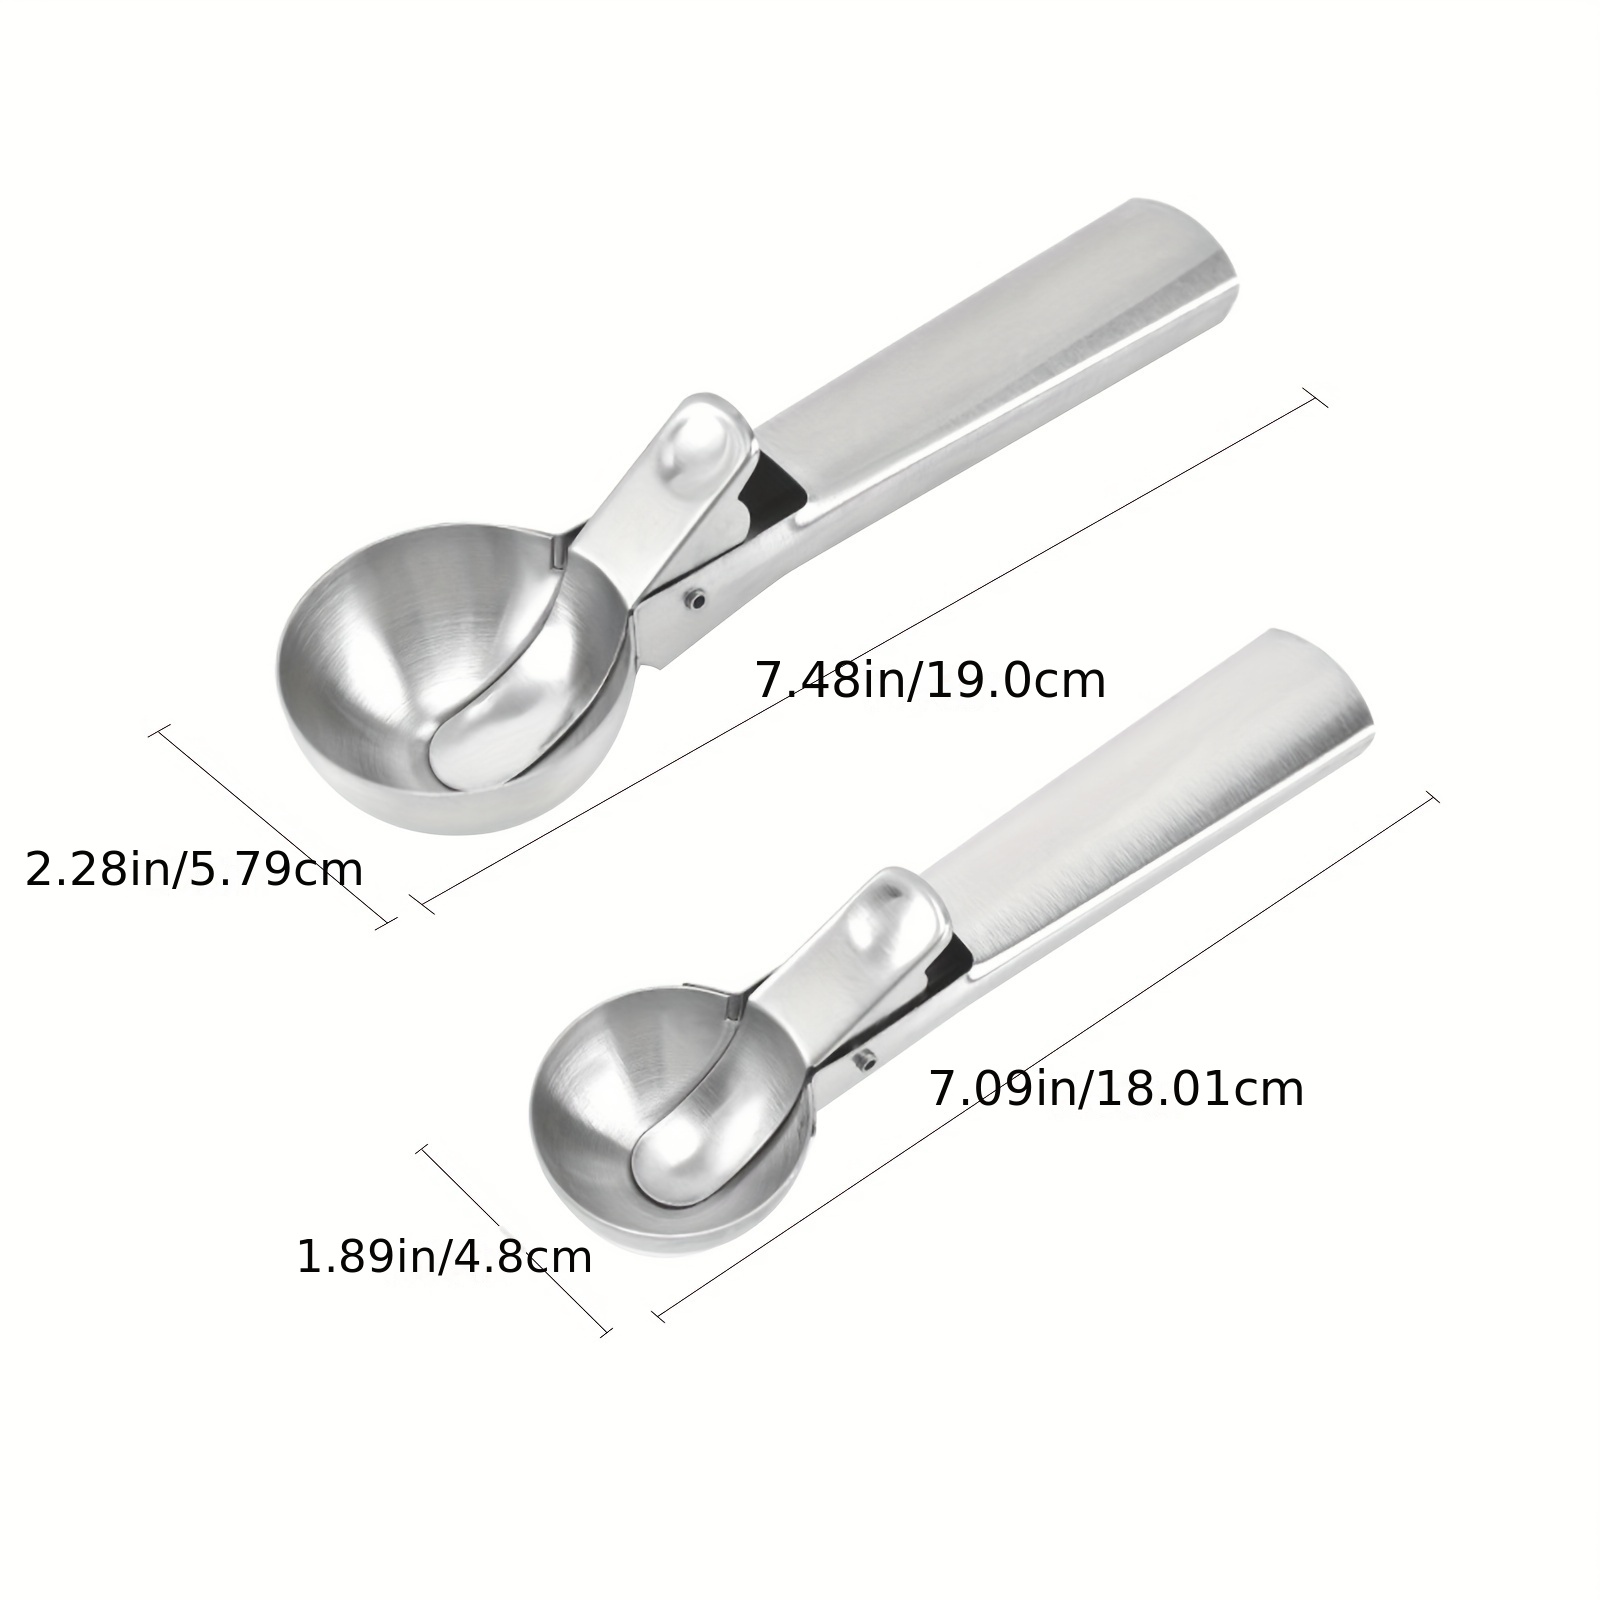 Stainless Steel Ice Cream Scoop Set with Trigger